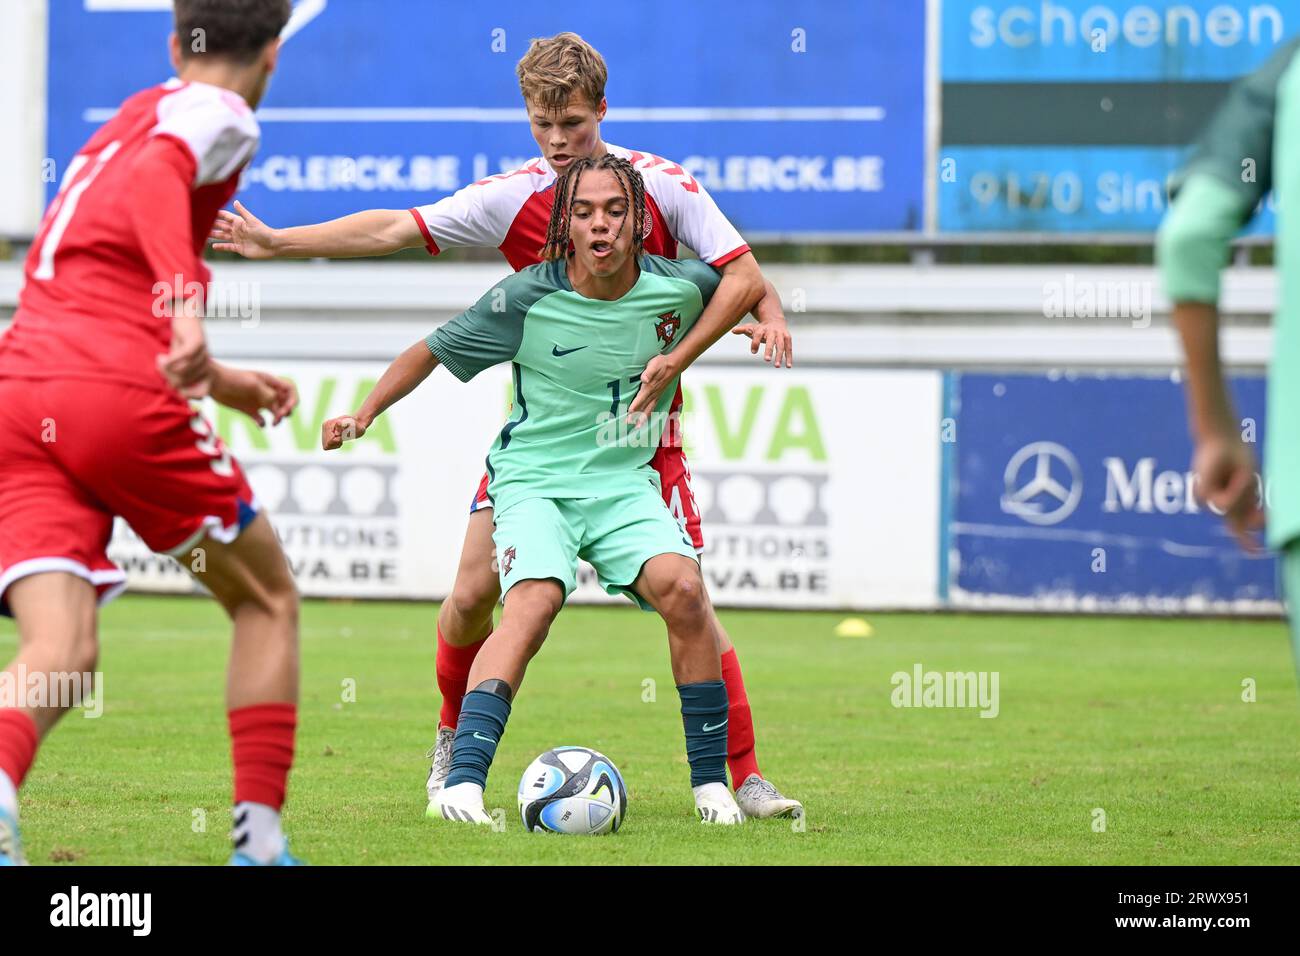 Lucas Bryde Bolvinkel (14) of Denmark pictured defending on Ricardo  Fernandes (17) of Portugal during a friendly soccer game between the  national under 16 teams of Denmark and Portugal on Tuesday 19